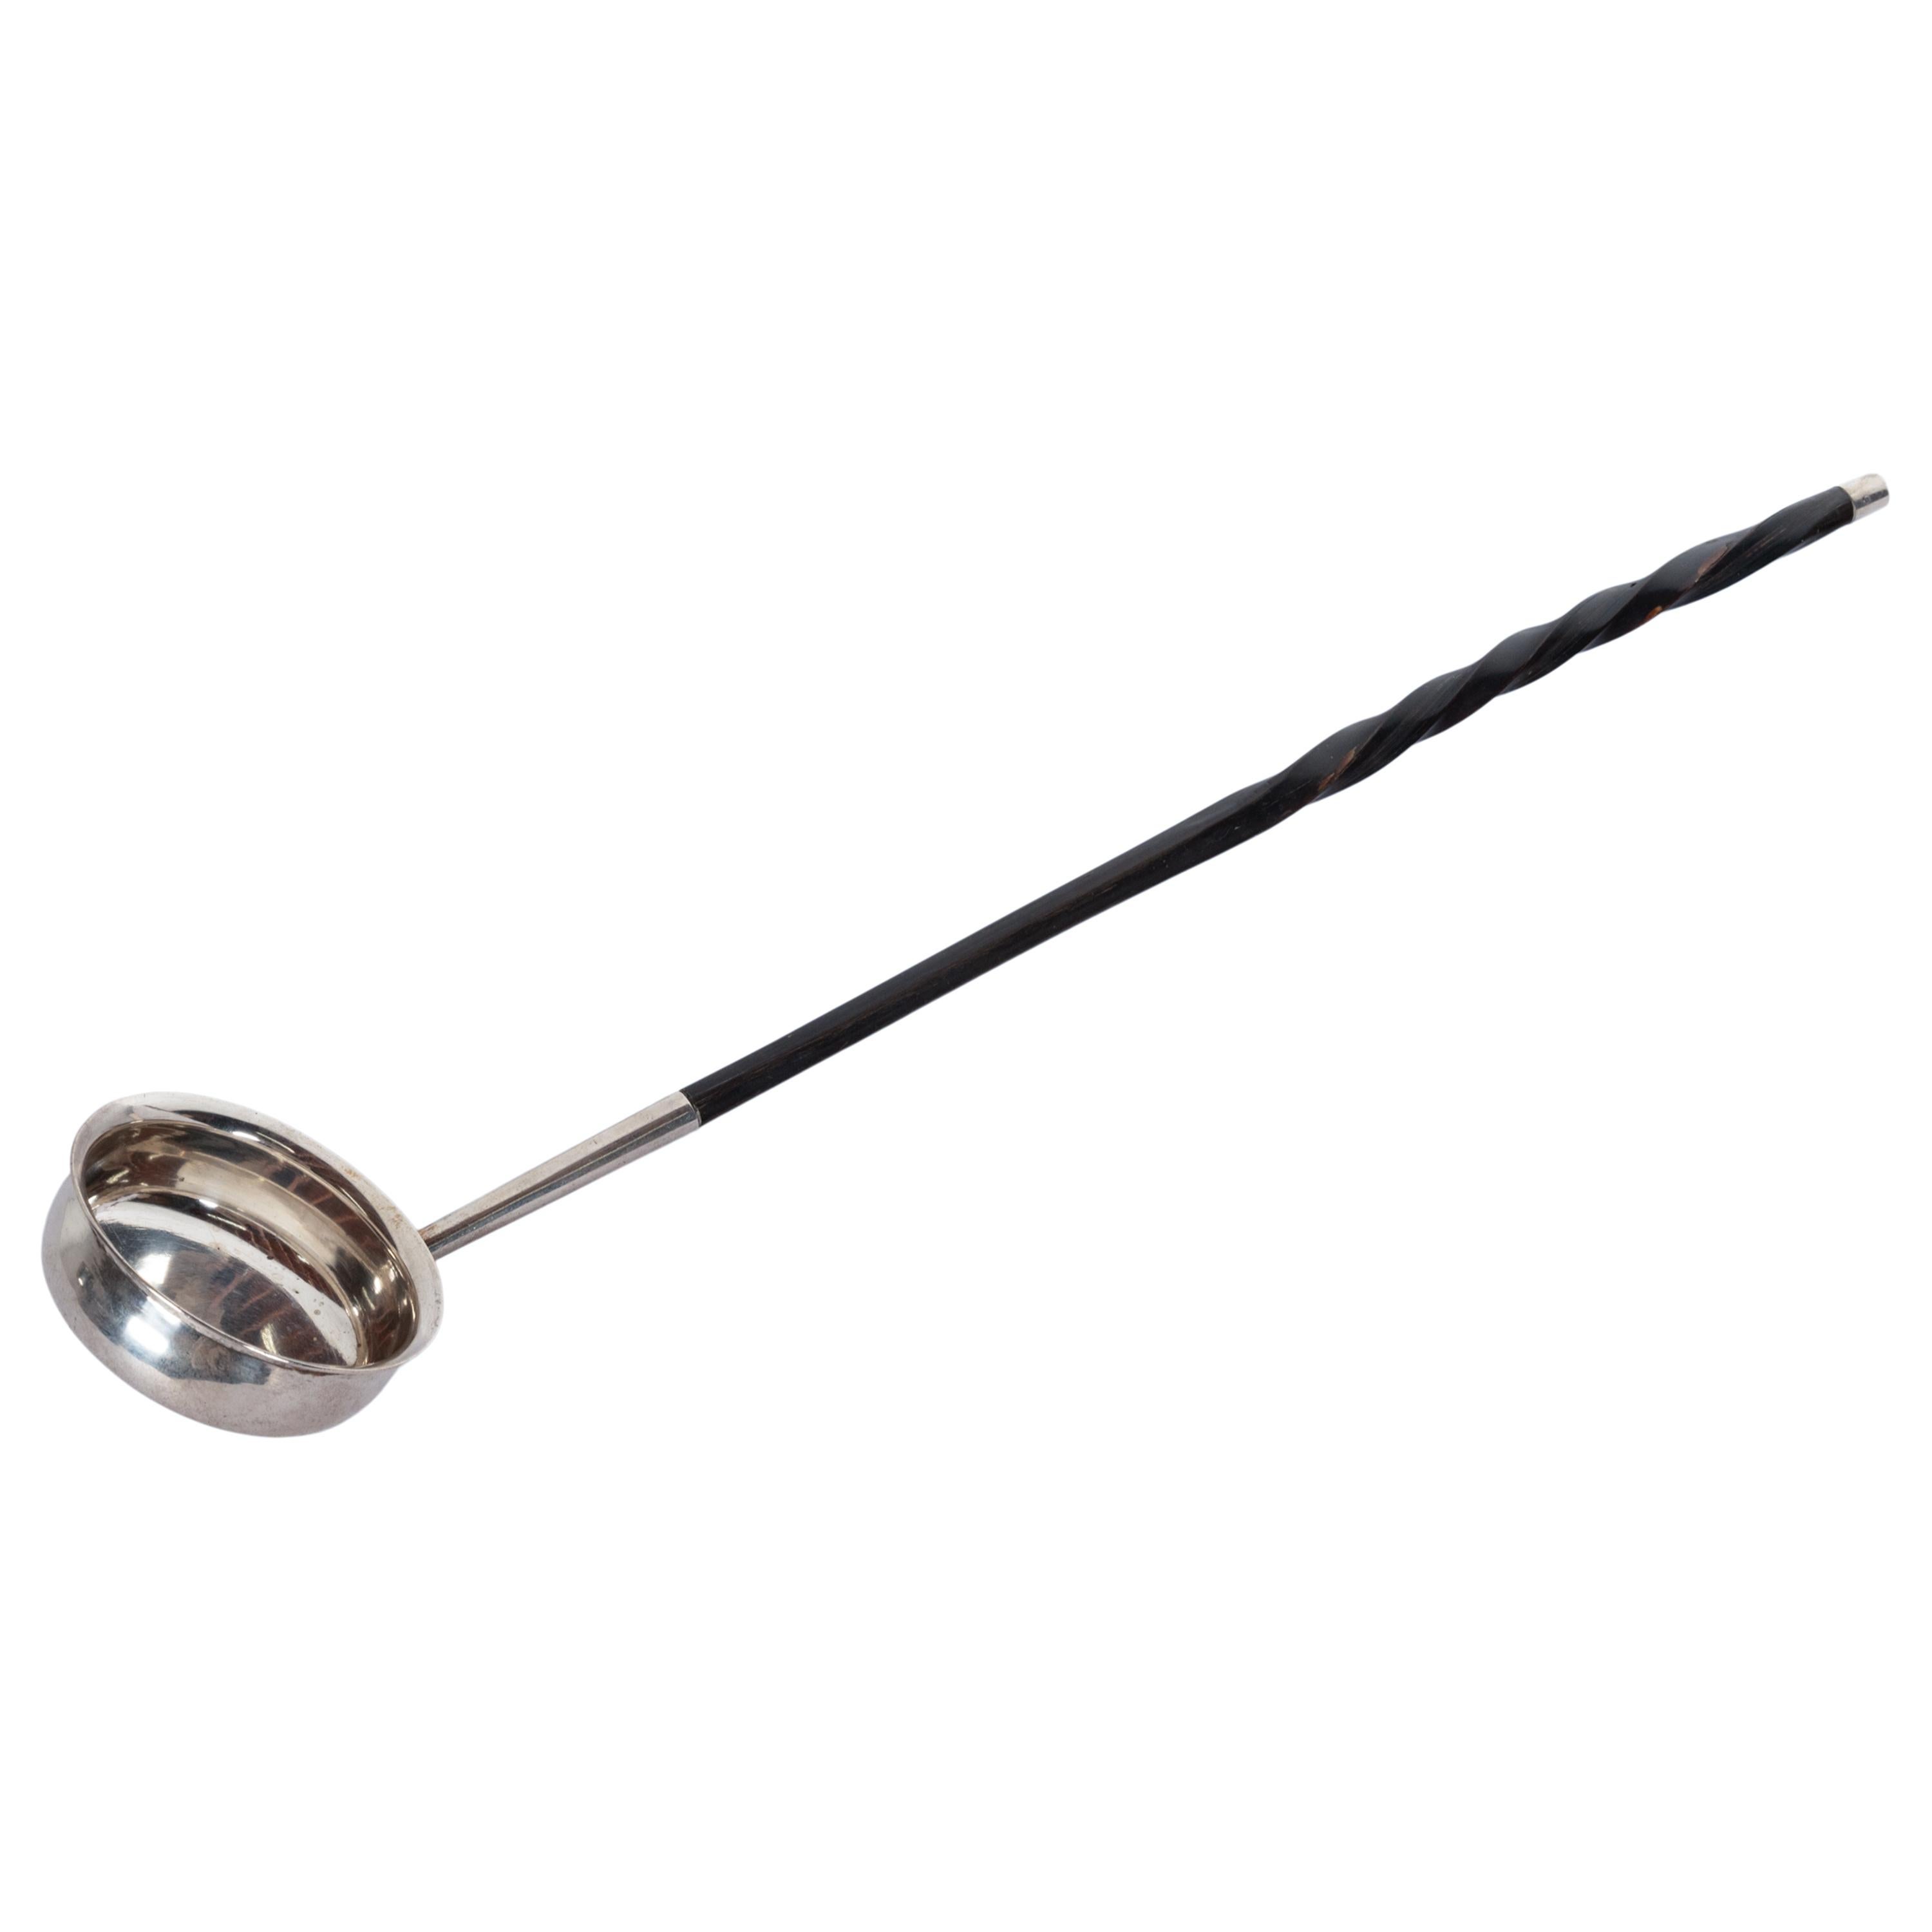 A good antique American sterling silver Georgian toddy/punch ladle, circa 1780, silver weight 2.5 oz (71 grams).
The ladle having a twist decorated whale baleen handle with a silver cap to the end. The generous round shaped bowl with a flared rim